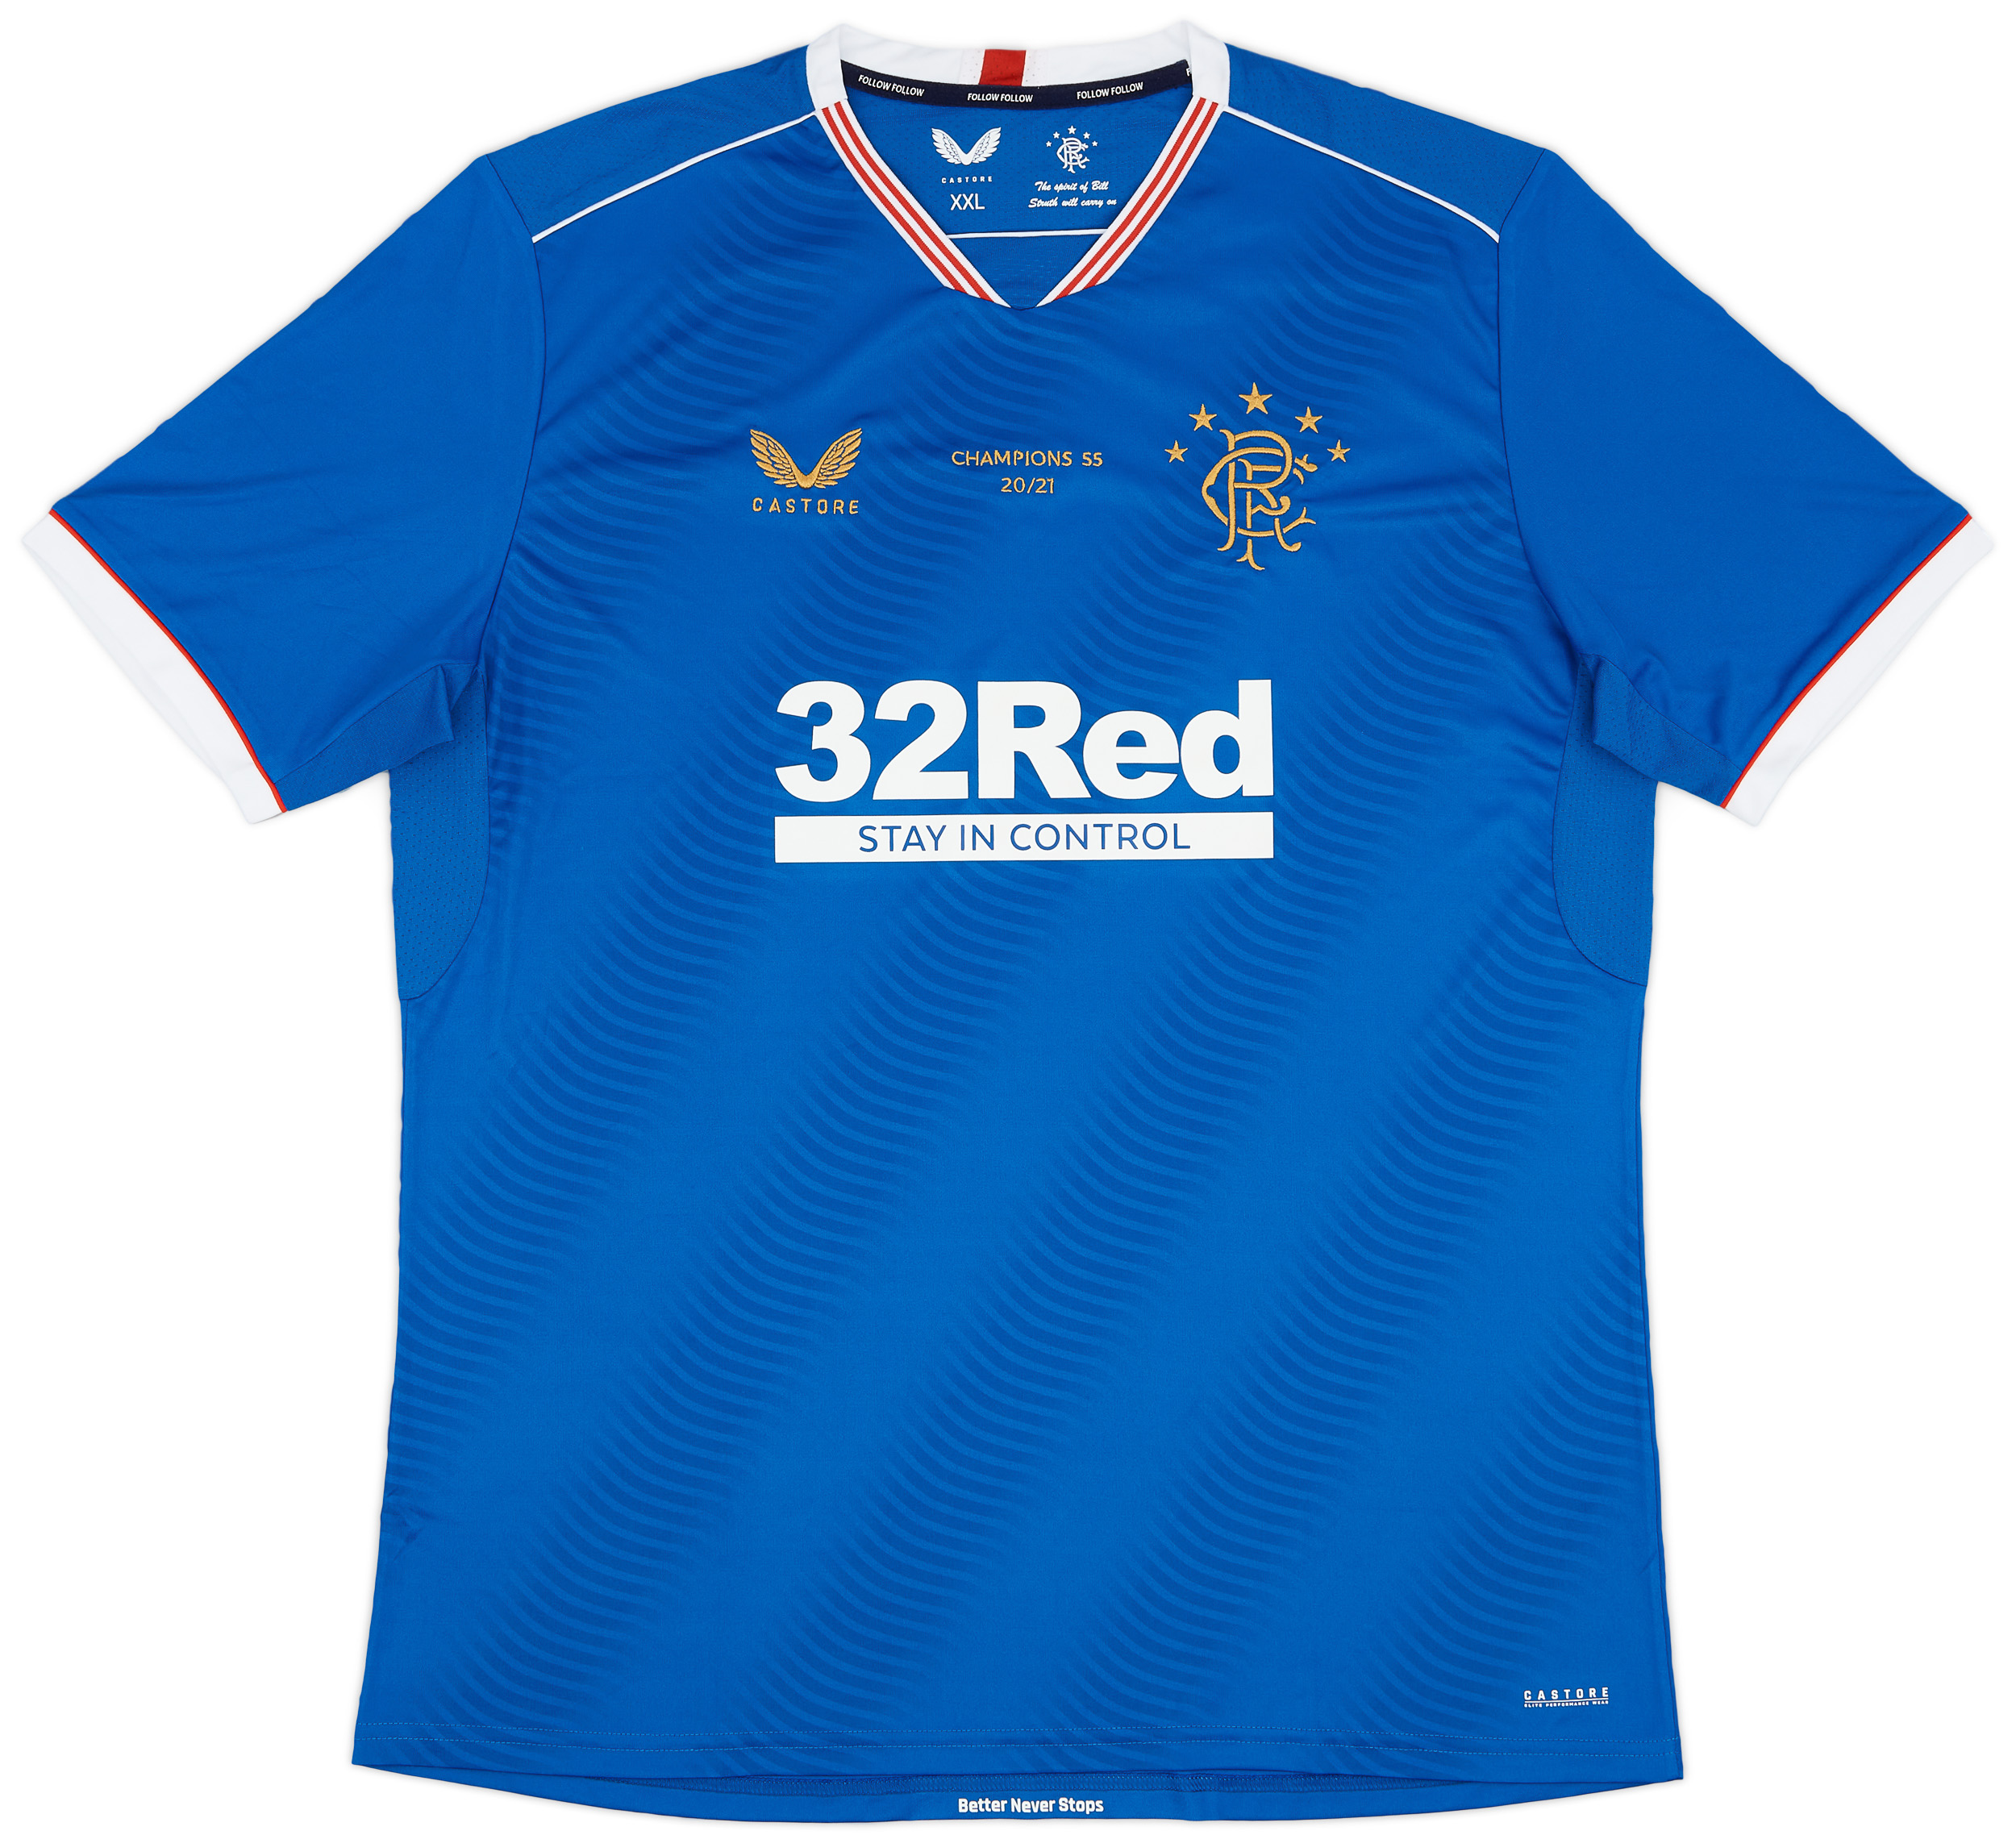 2020-21 Rangers Special Edition 'Champions 55 20/21' Home Shirt - 10/10 - ()